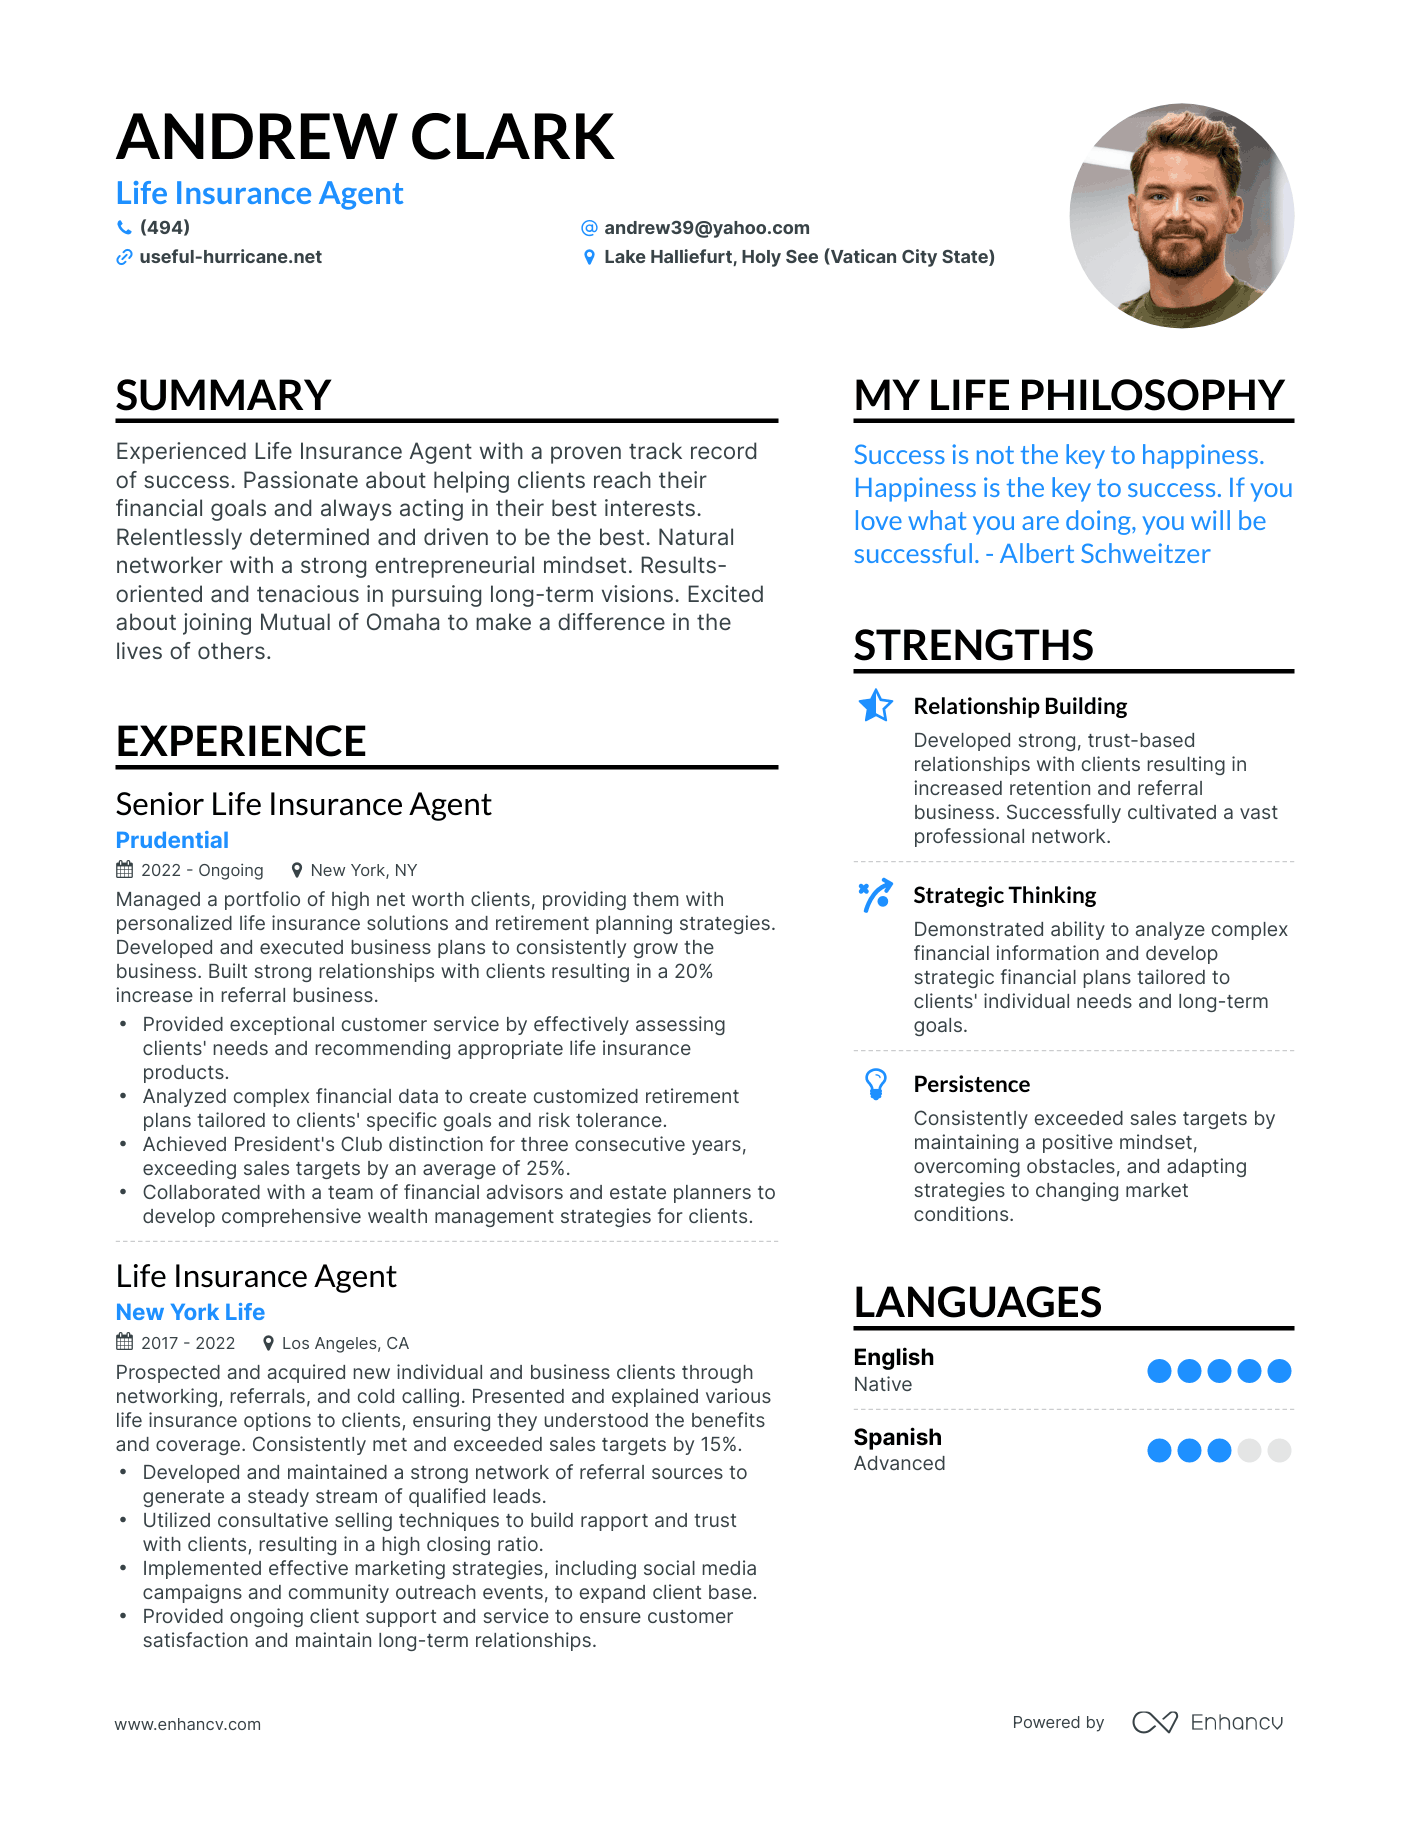 Life Insurance Agent resume example